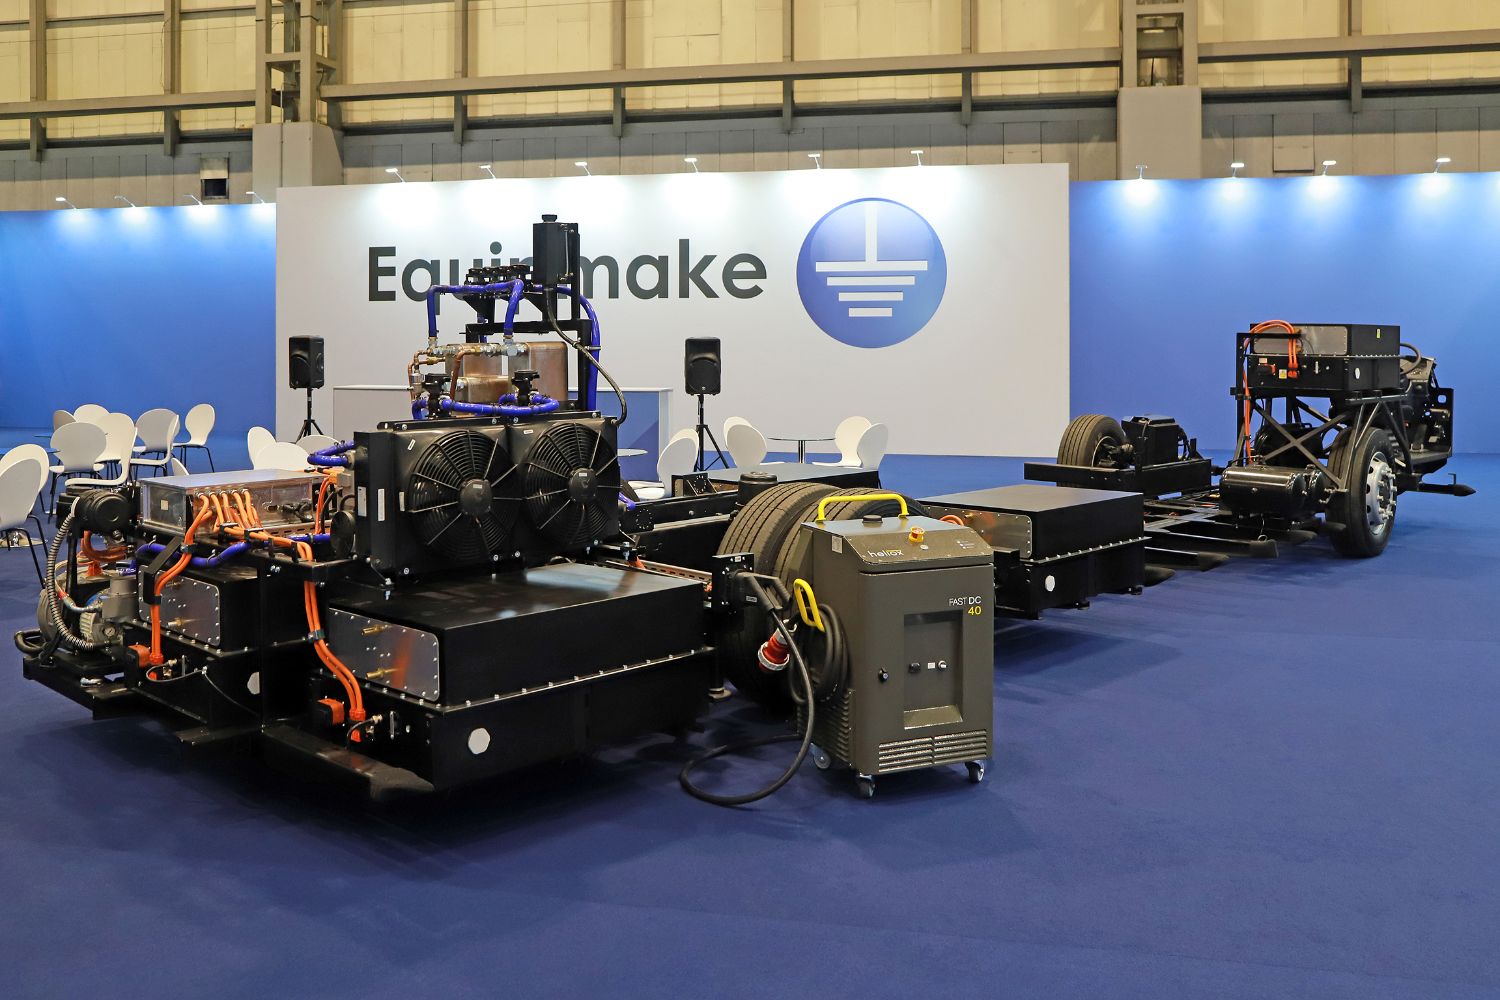 Equipmake-electric-chassis